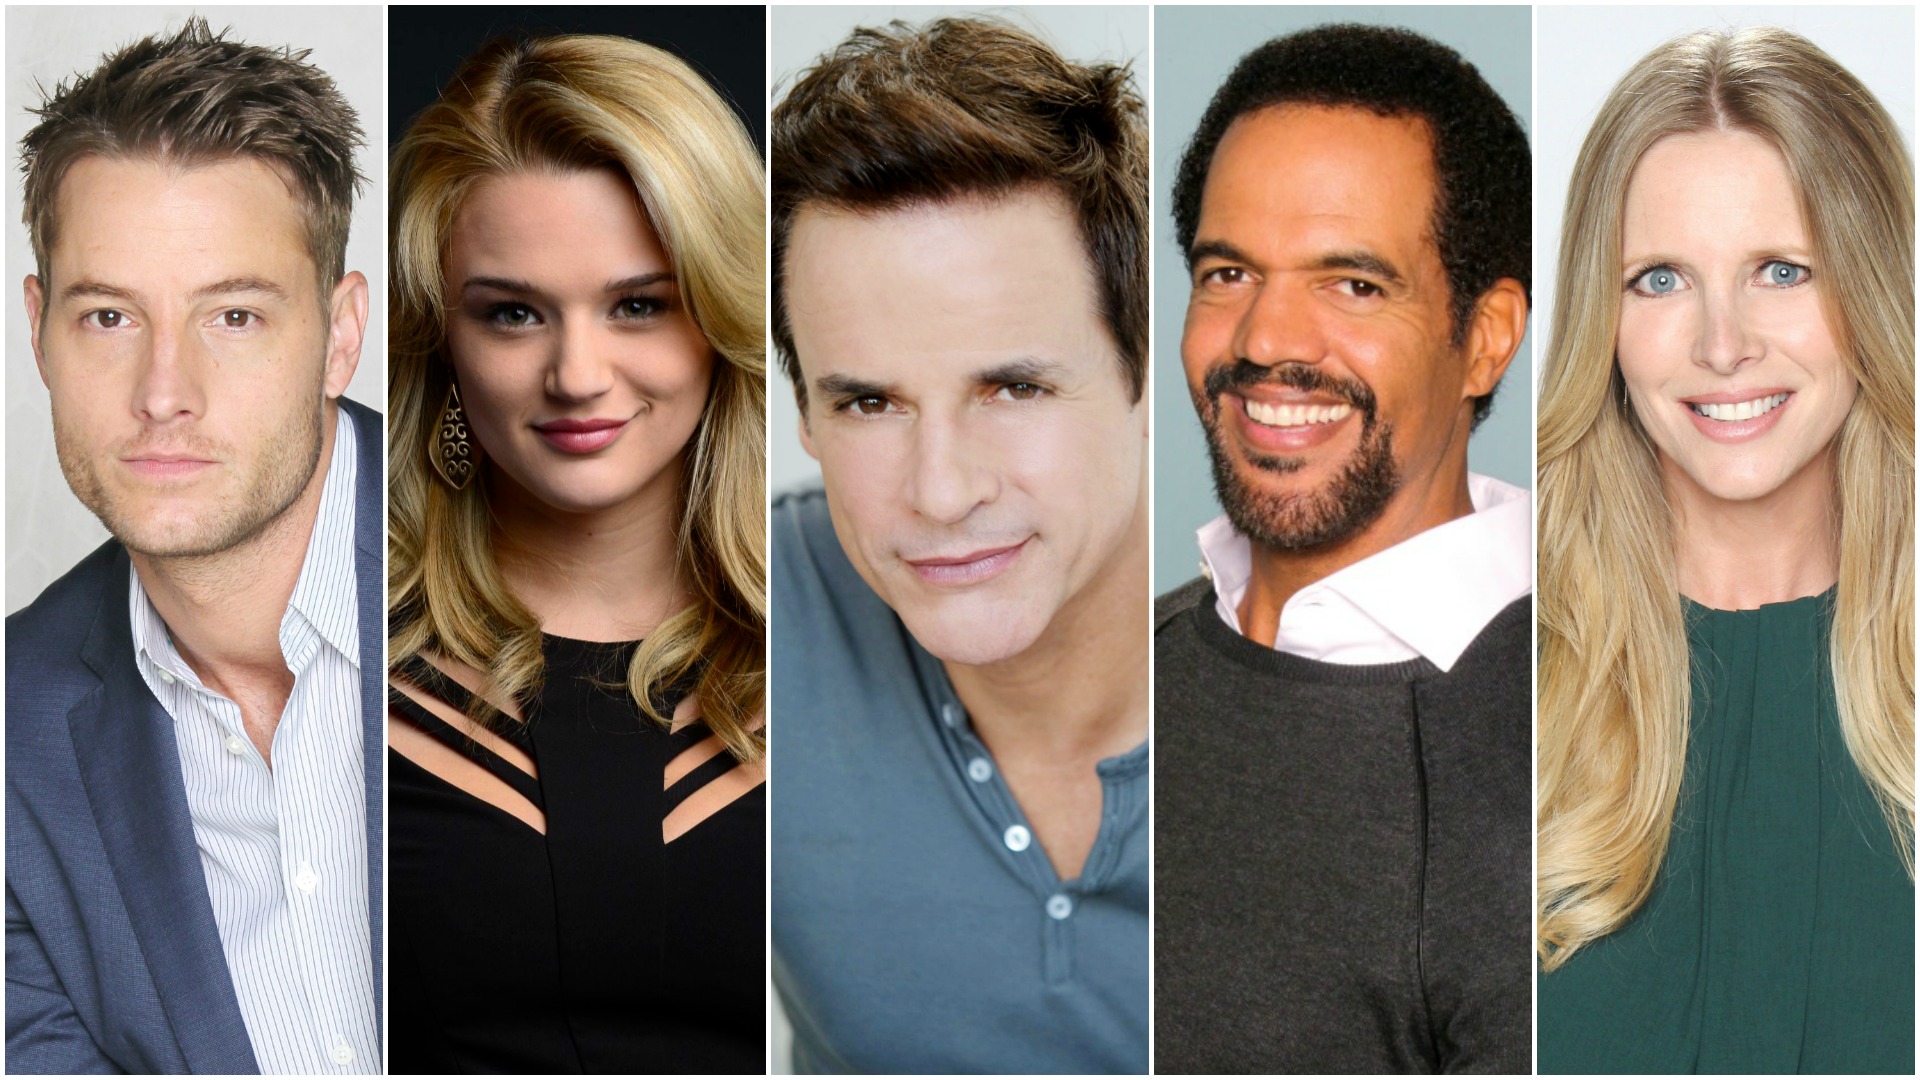 Learn what these Y&R actors had to say about their Daytime Emmy nominations!